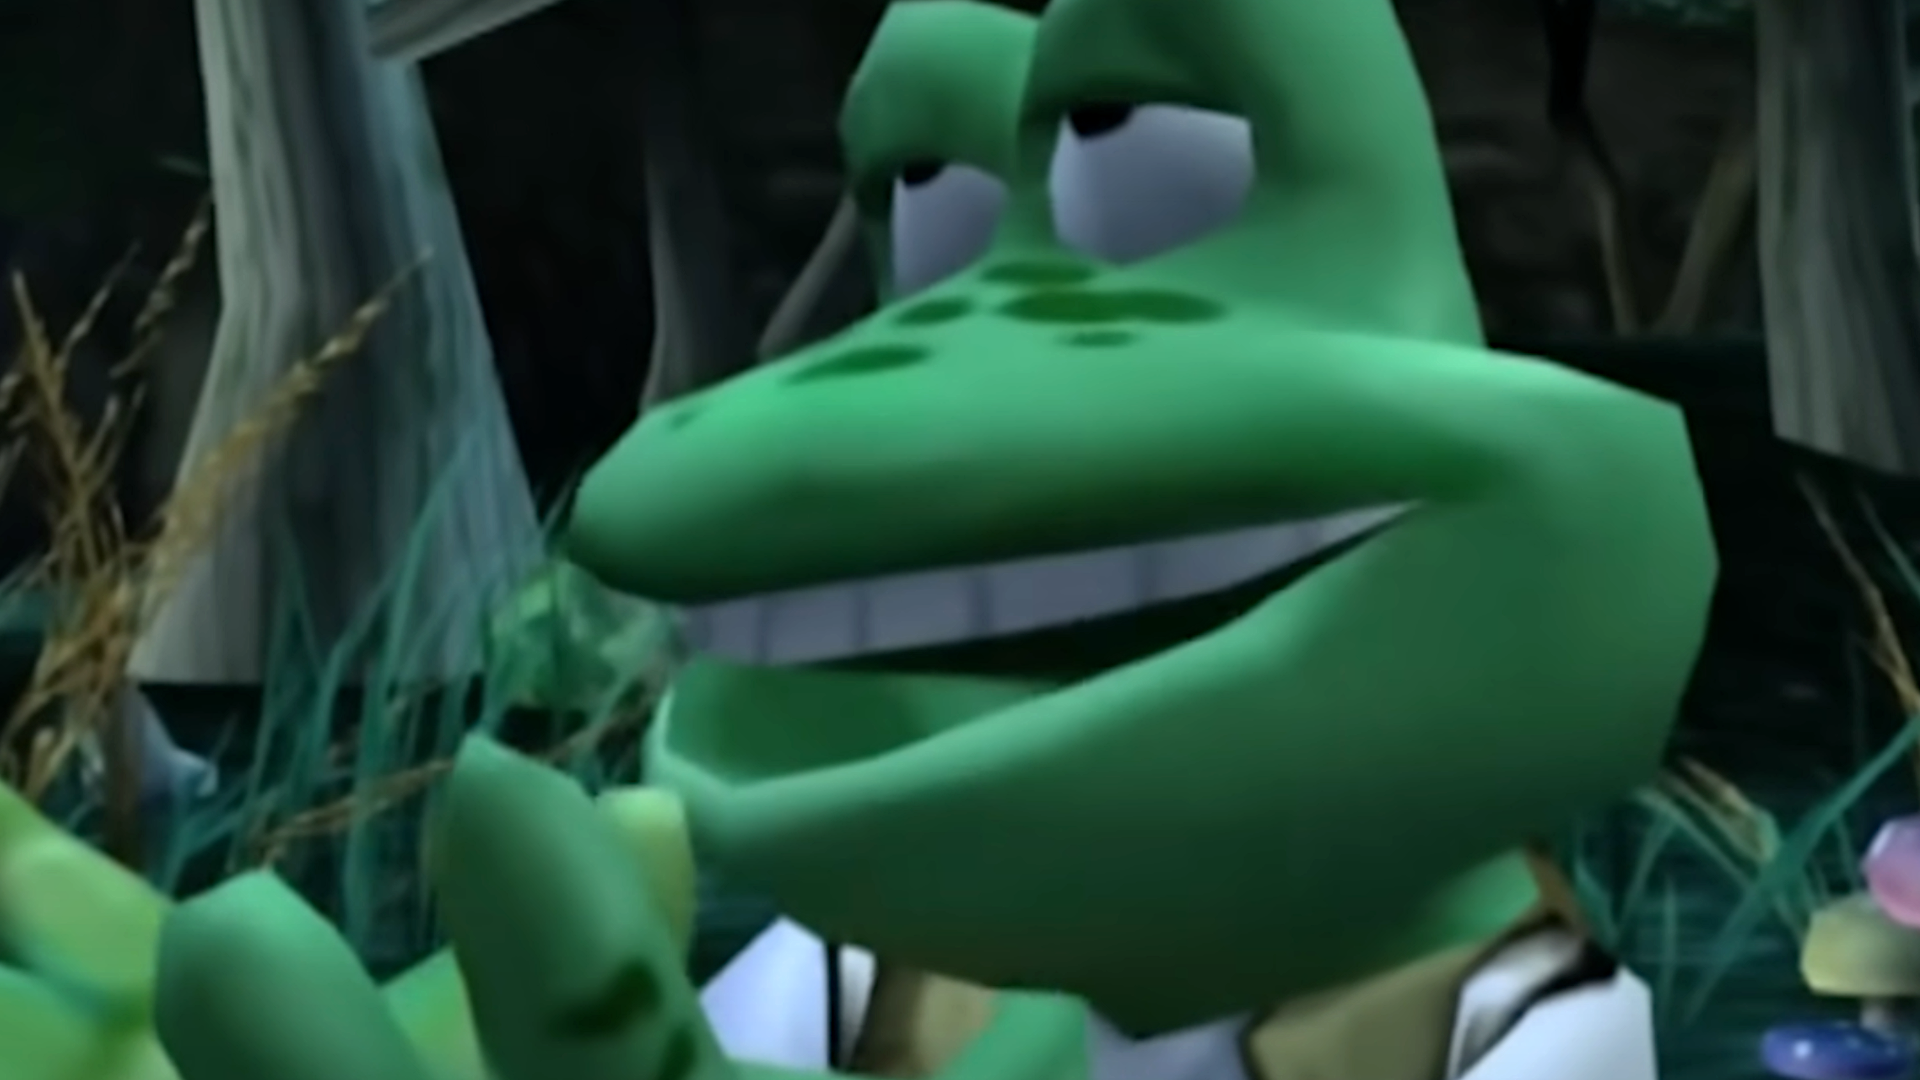 An image of Frogger from Frogger: The Great Quest looking suspect, his eyes rolled into the back of his head, as if he were to speak tongues.